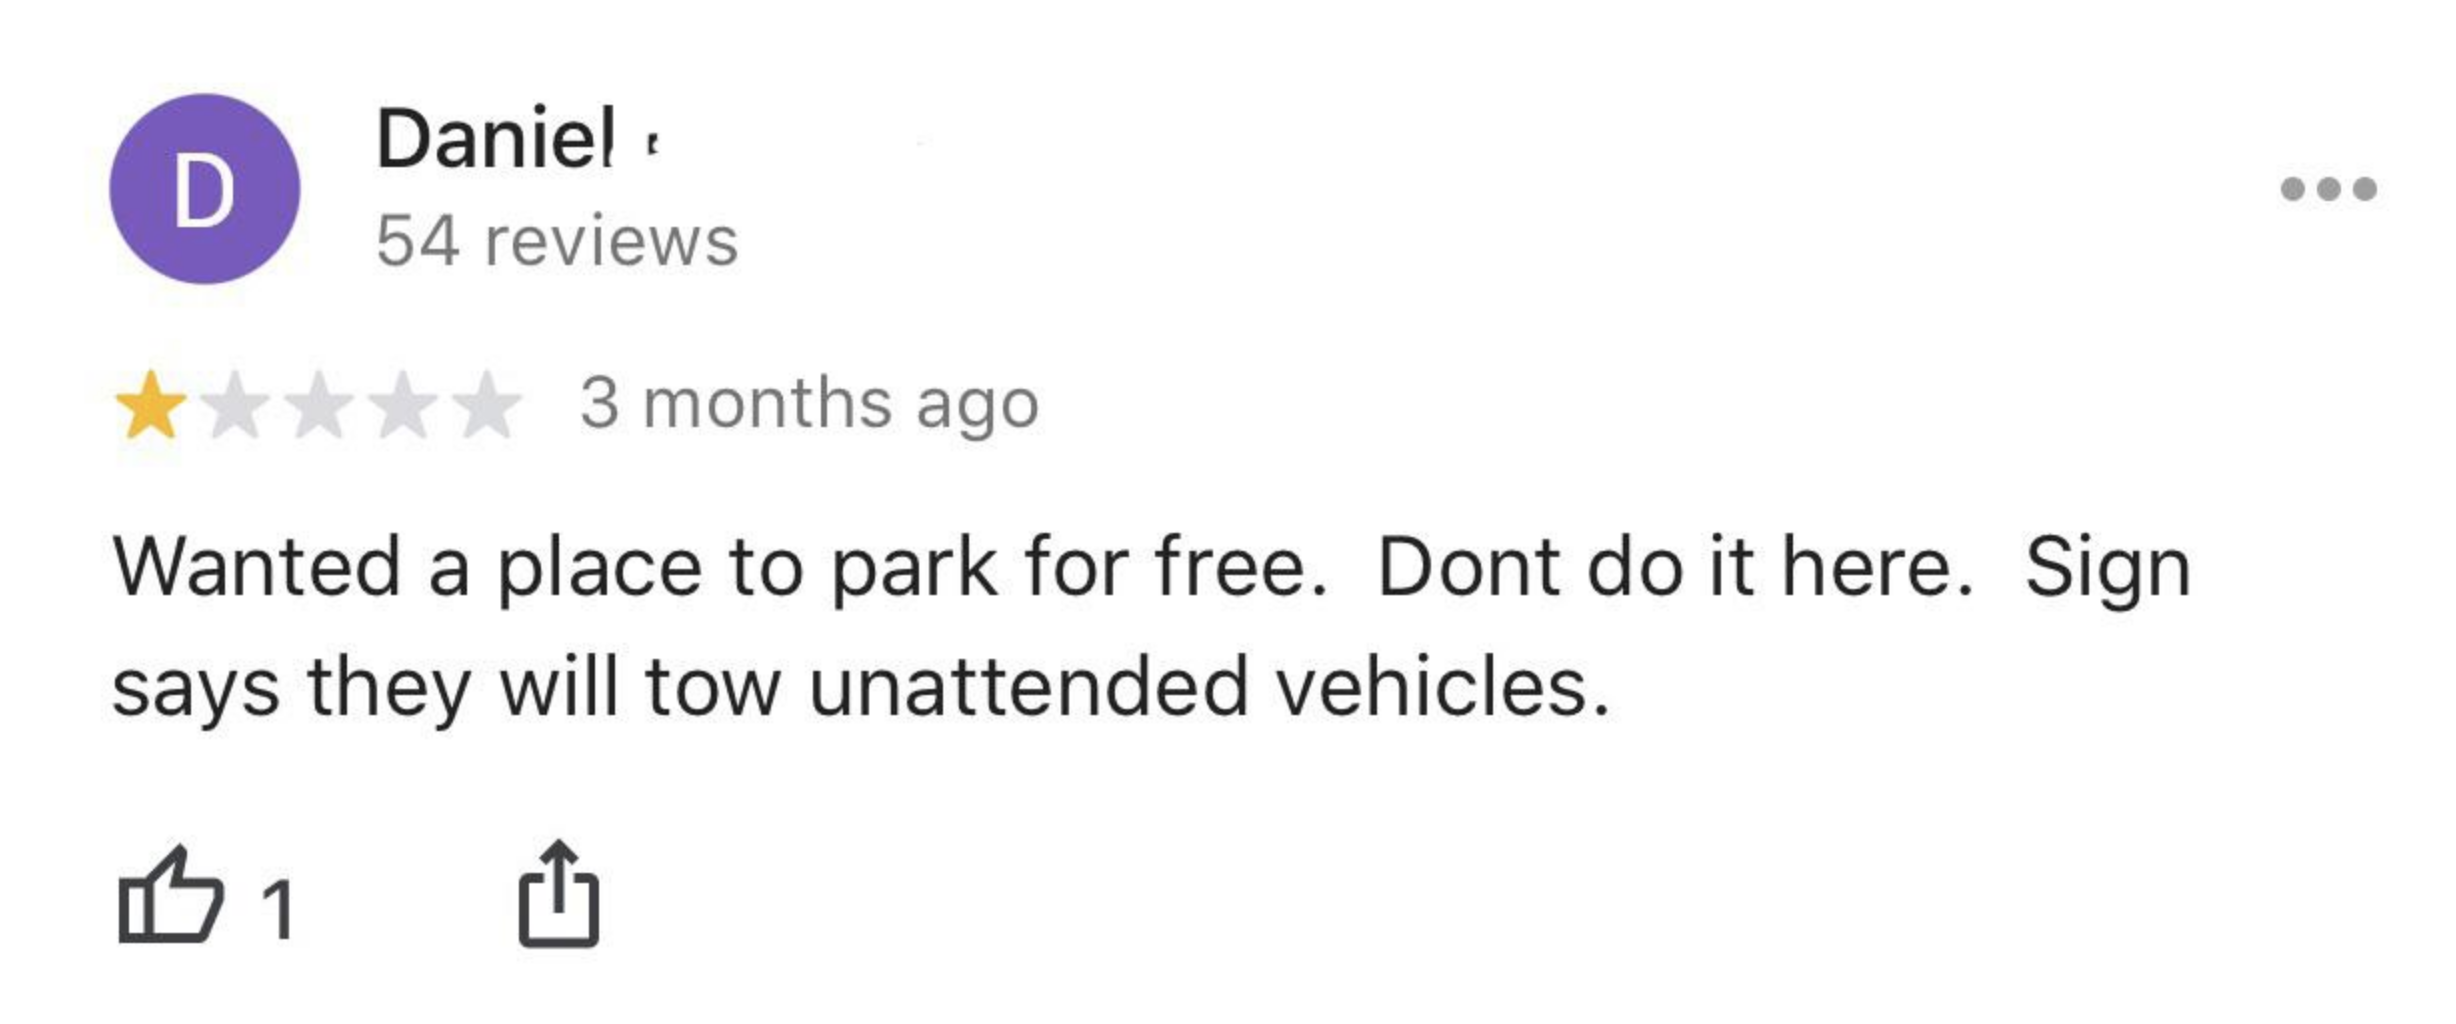 &quot;Wanted a place to park for free.&quot;